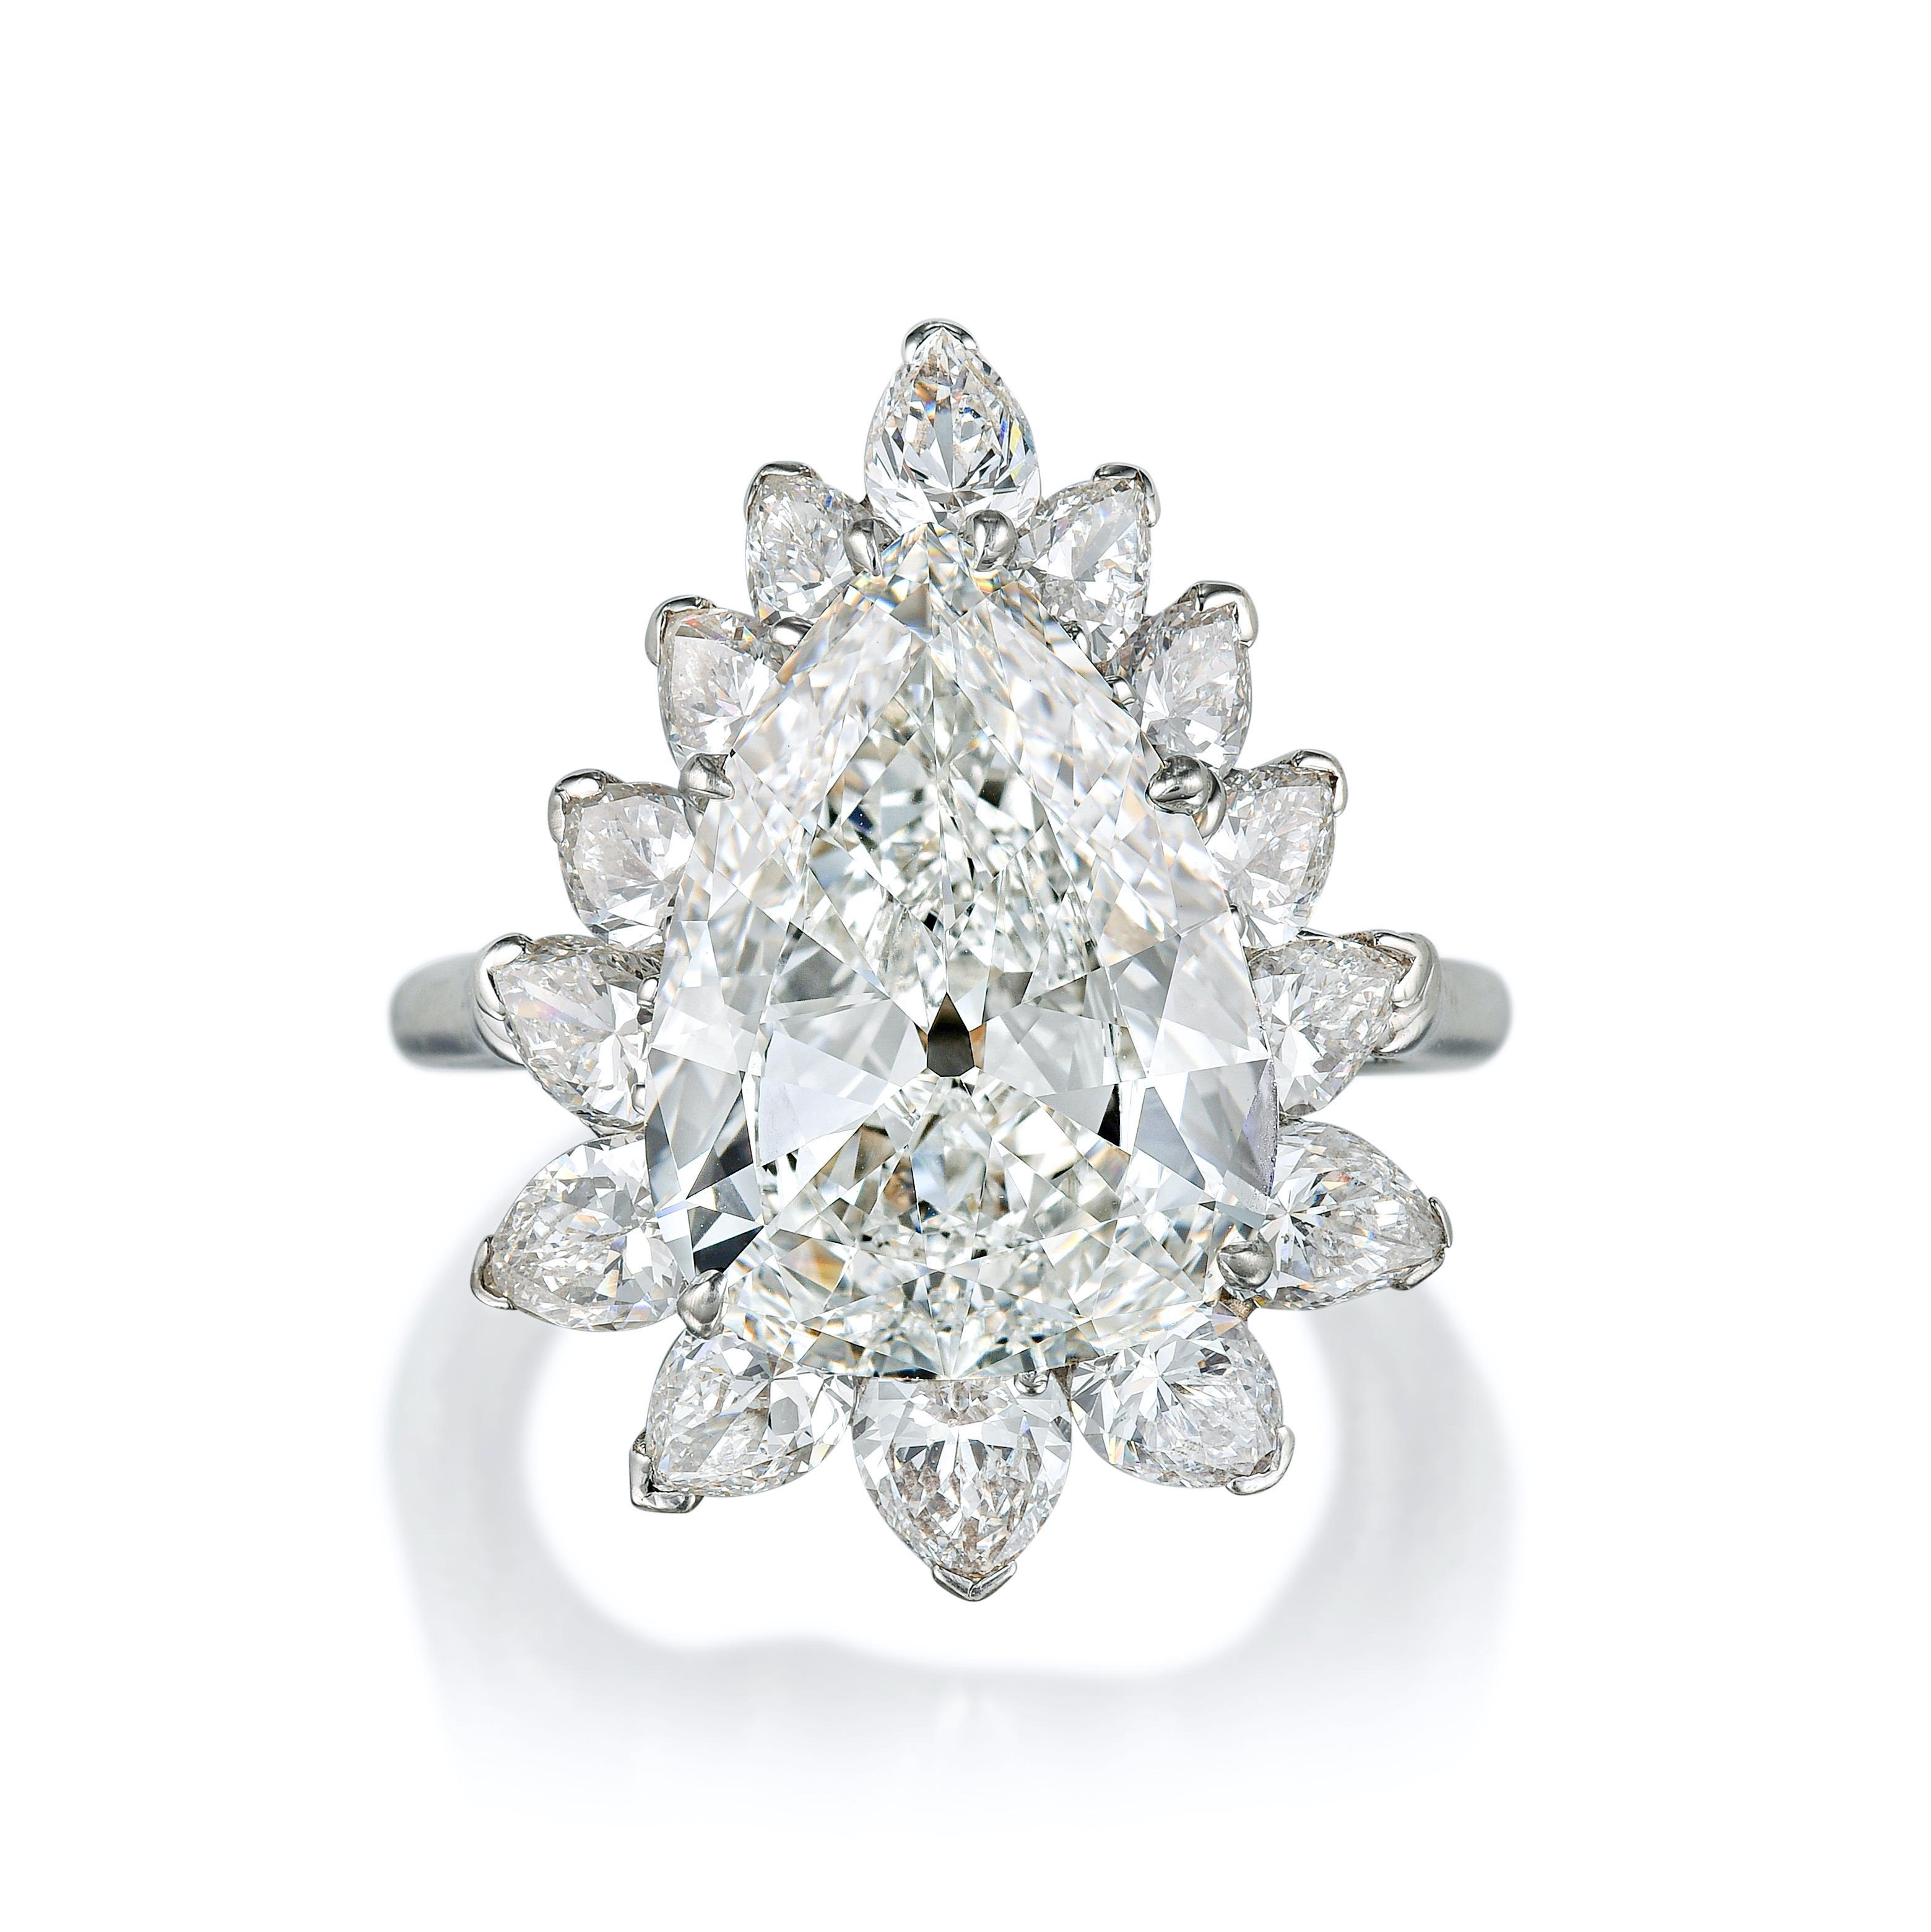 How much would the Harry Winston ring cost? : r/GossipGirl